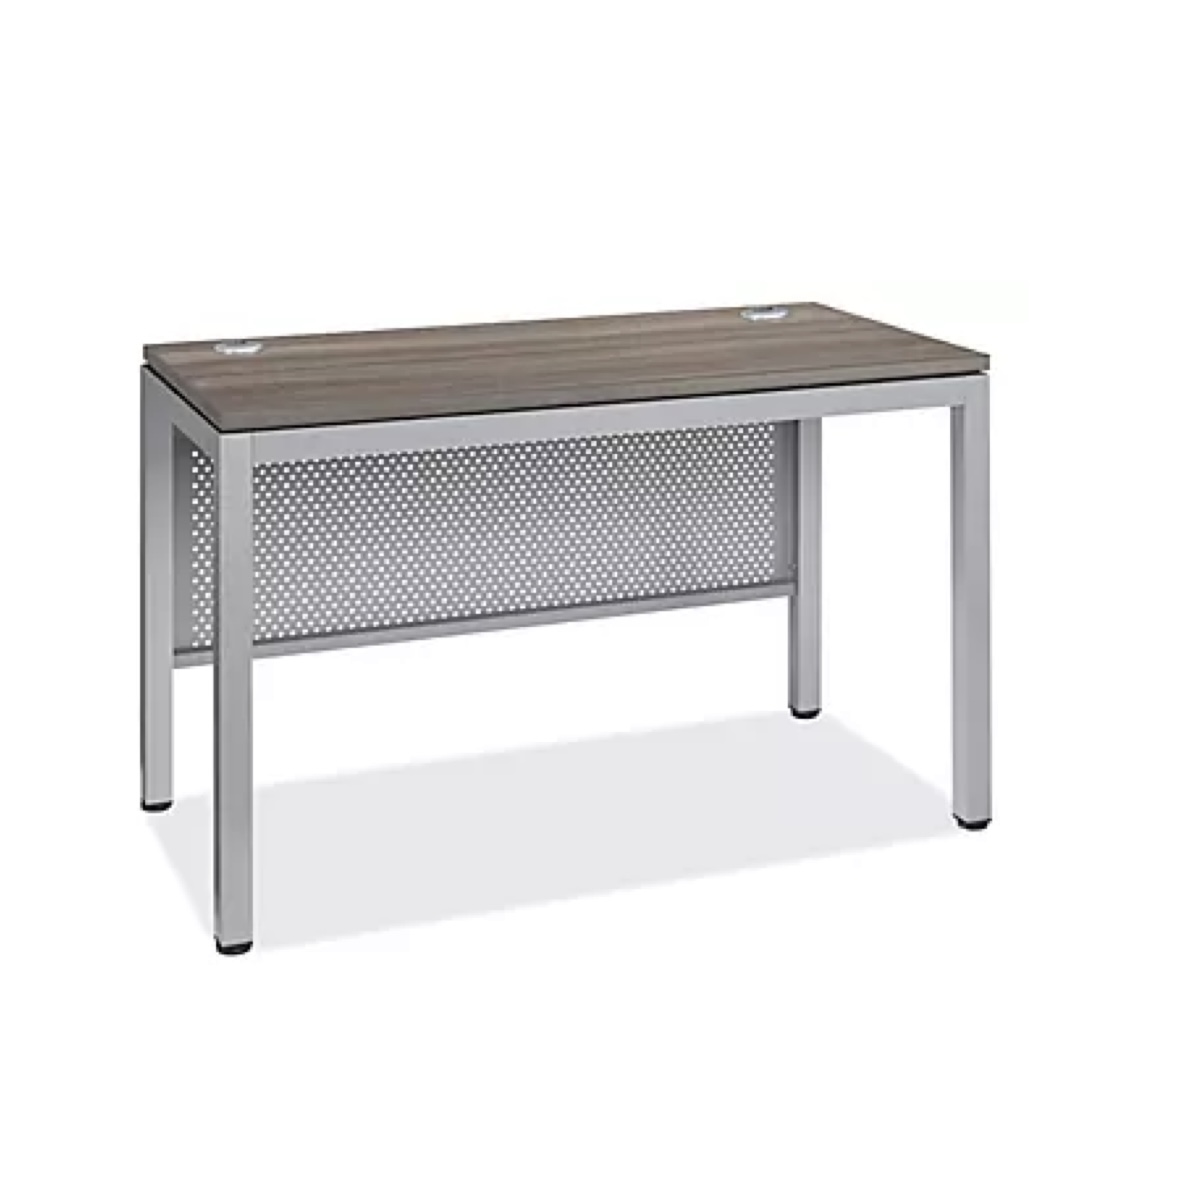 Customizable Metal and Wood Office Furniture